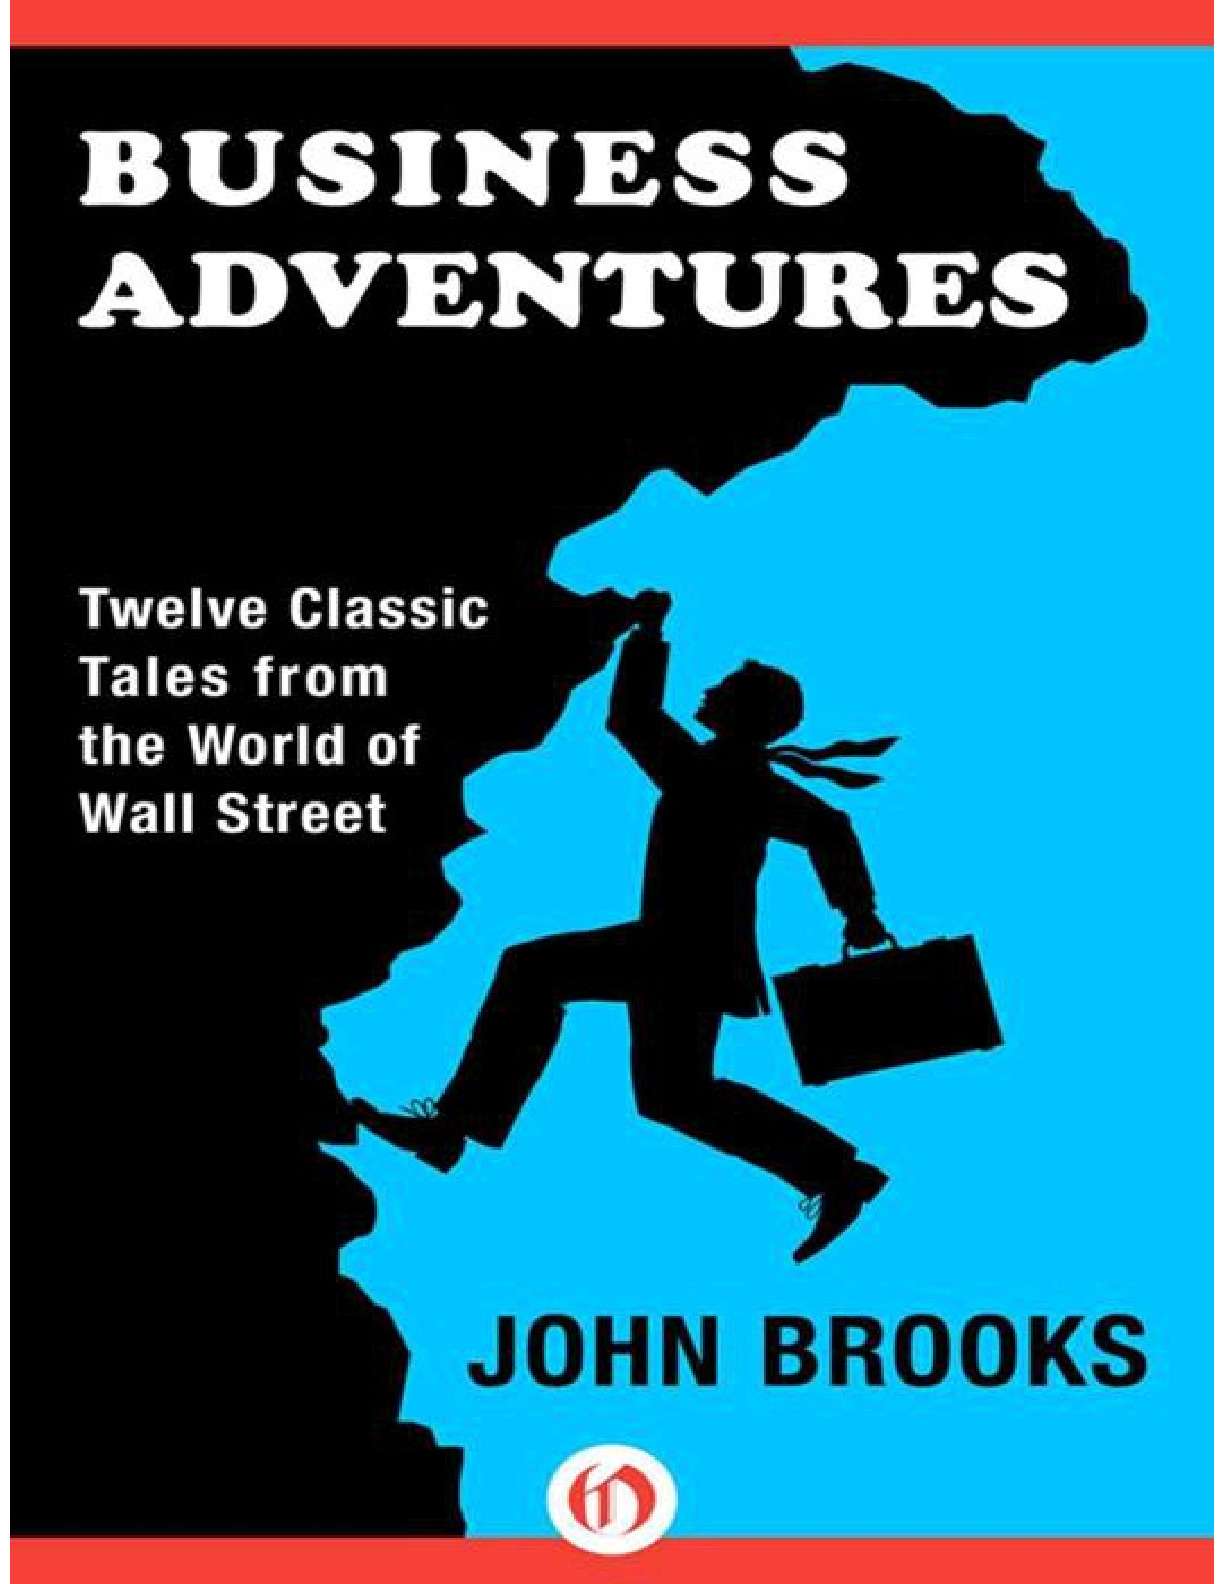 Business Adventures – Twelve Classic Tales from the World of Wall Street